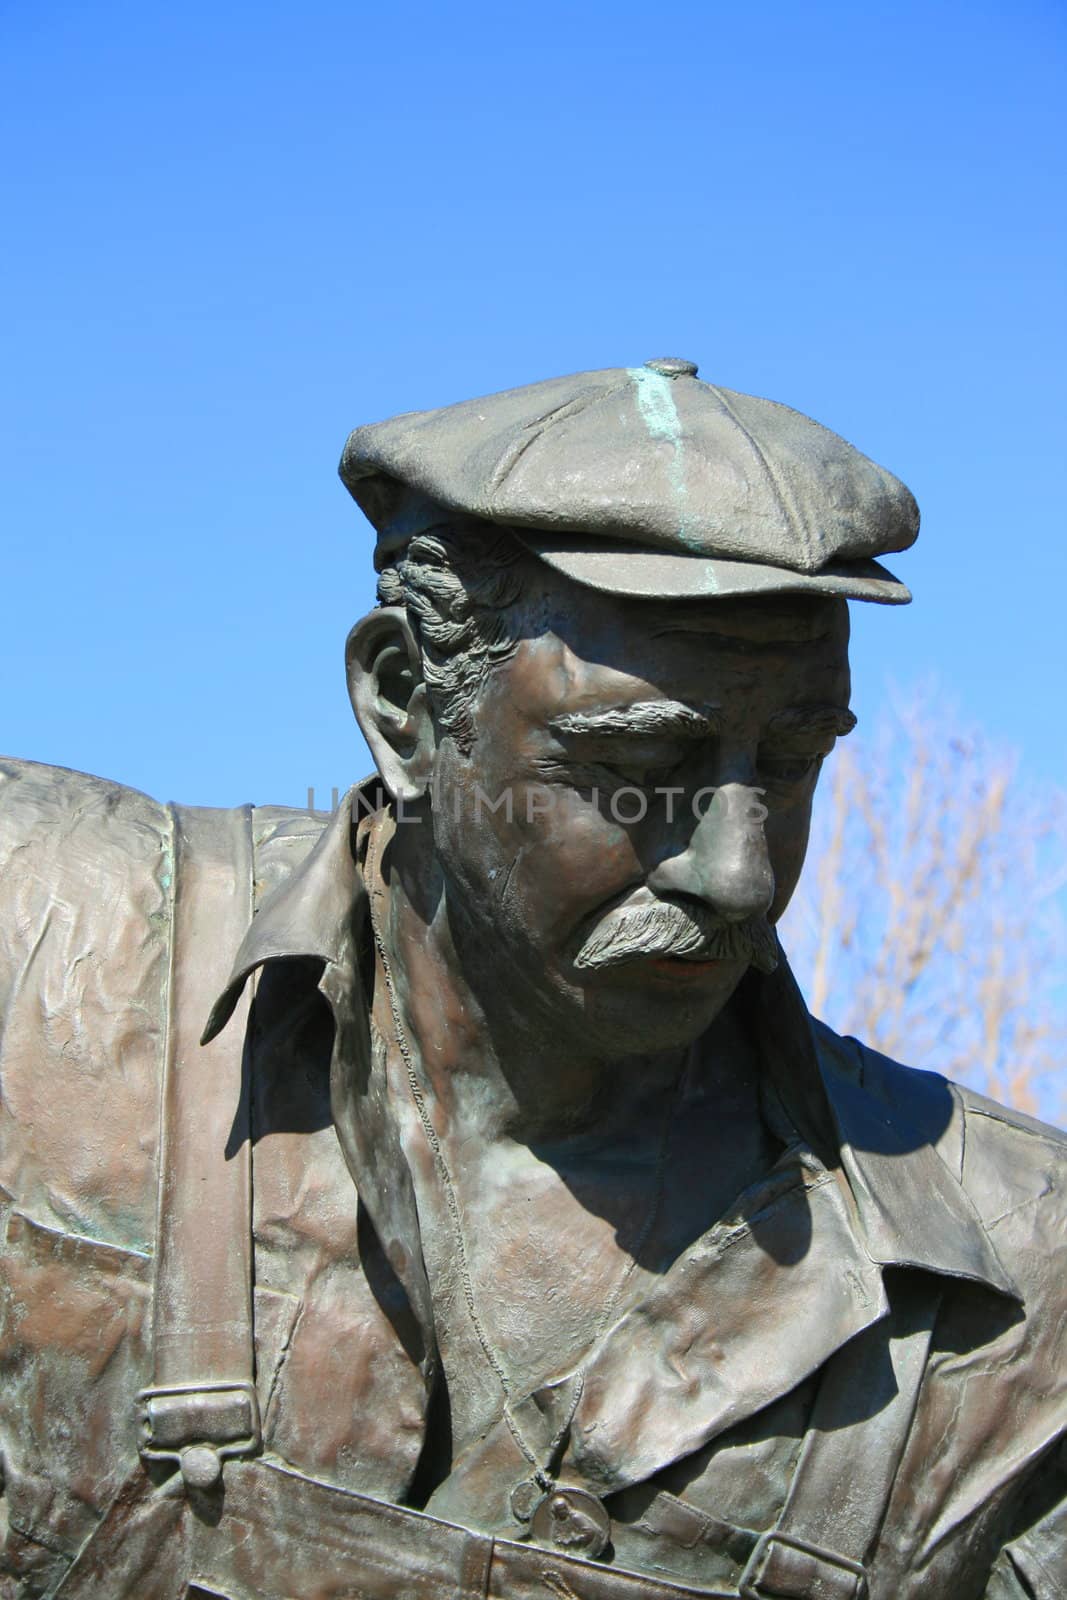 Close up of a statue of a man.
